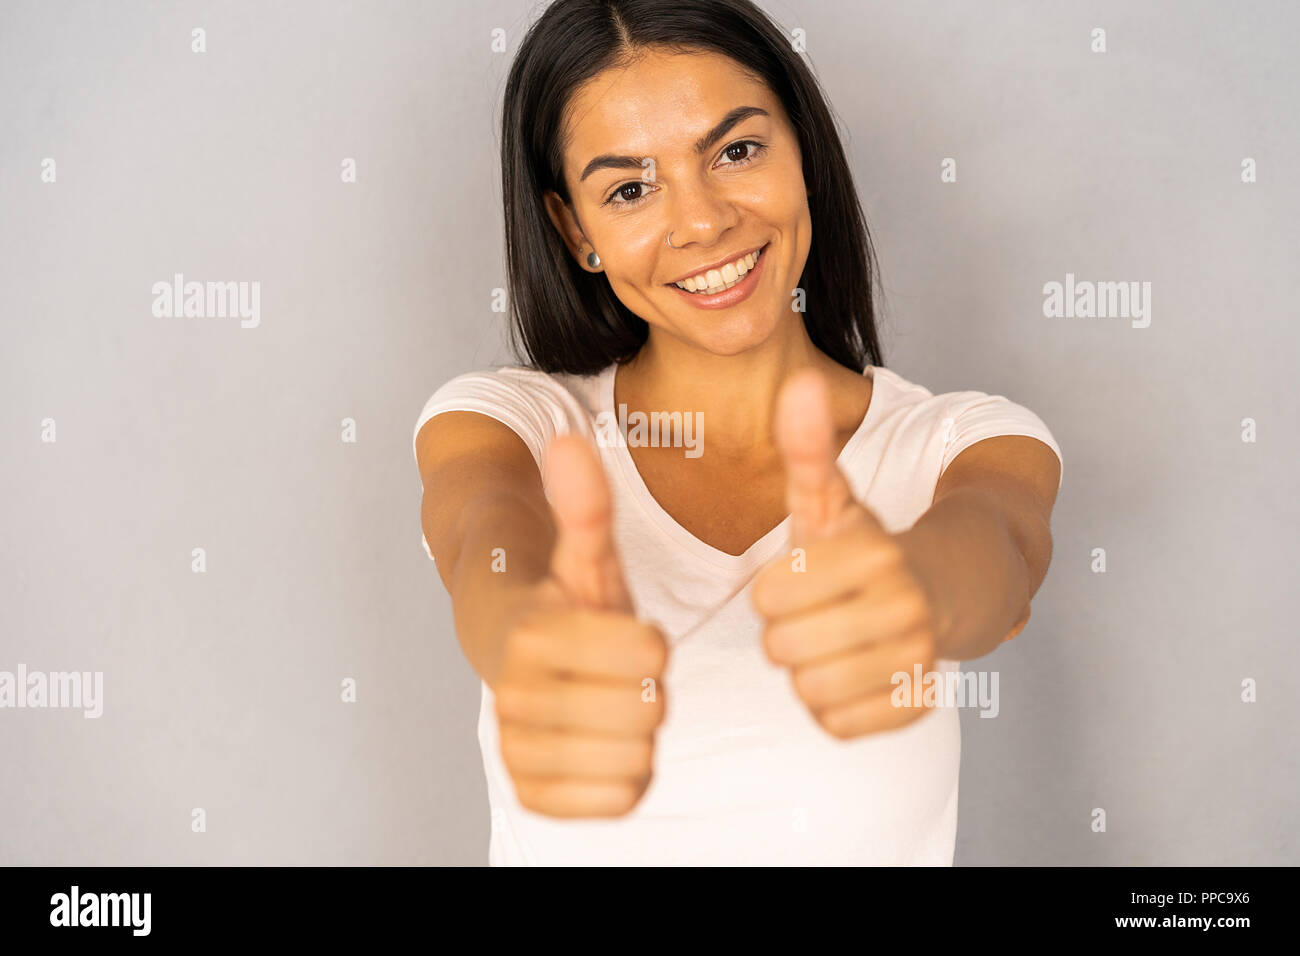 Young happy cheerful woman showing thumb up. Banque D'Images